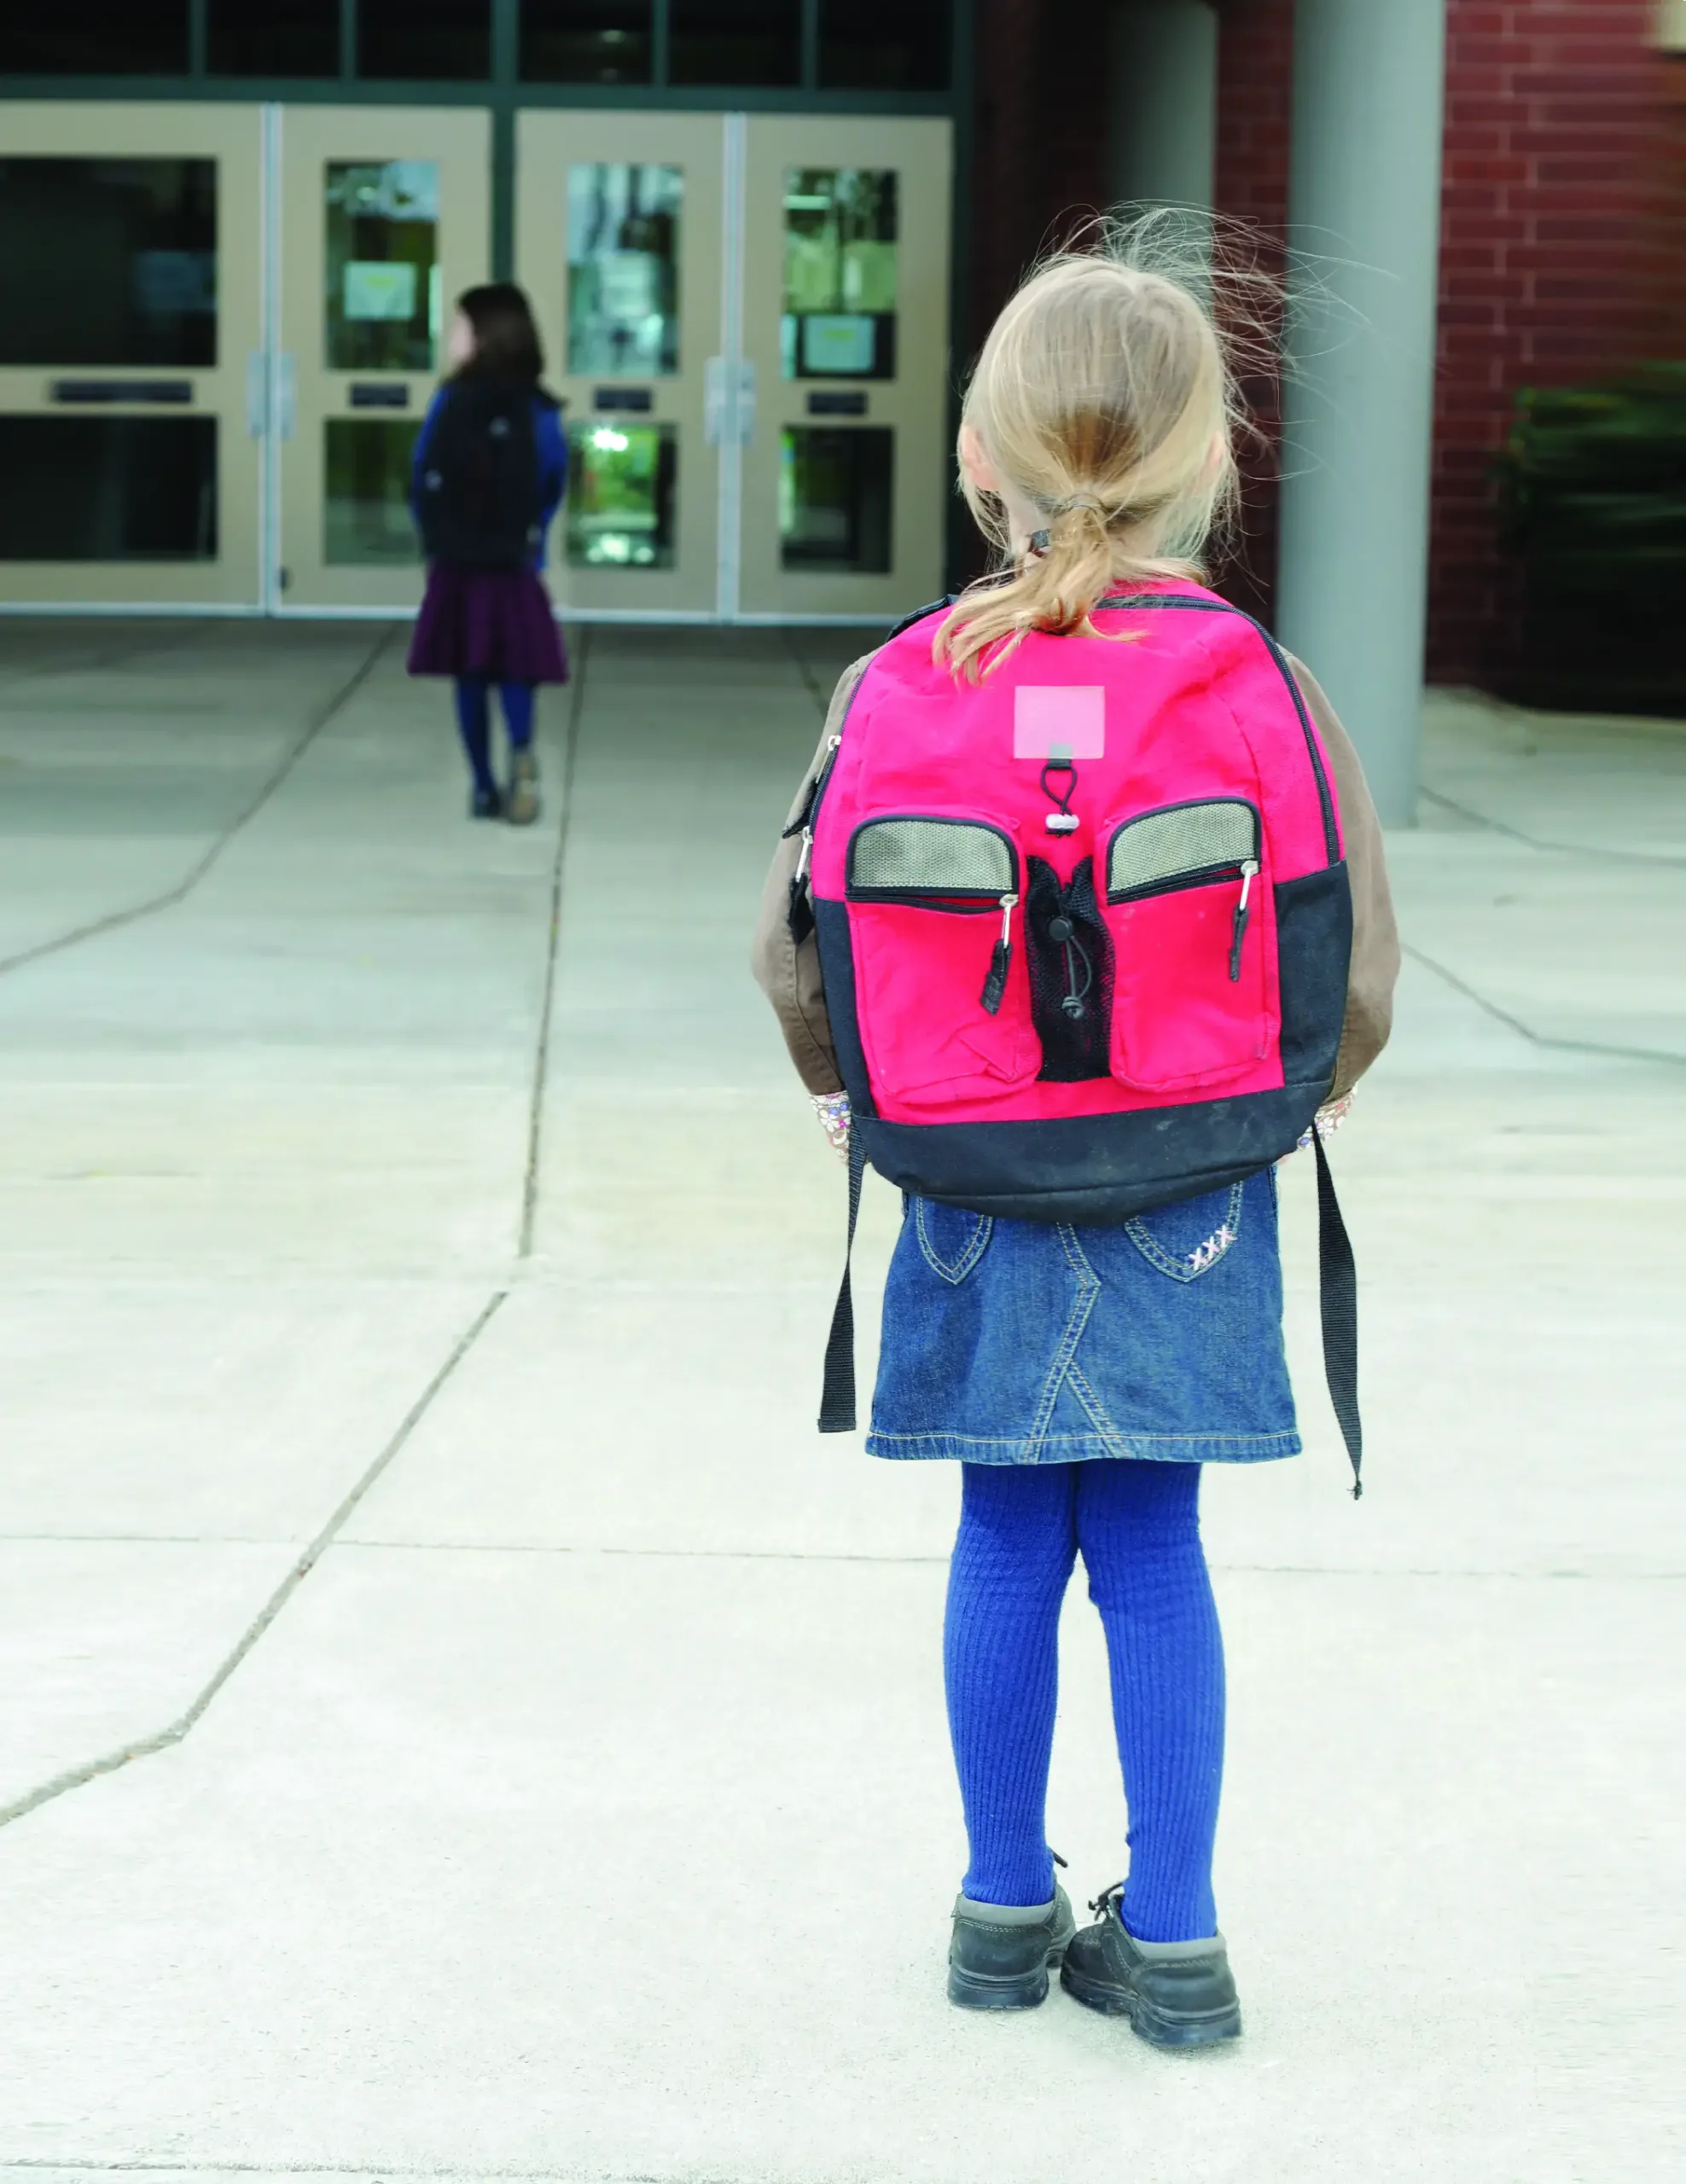 Our area experts help you consider what's most important when picking a school for your child.